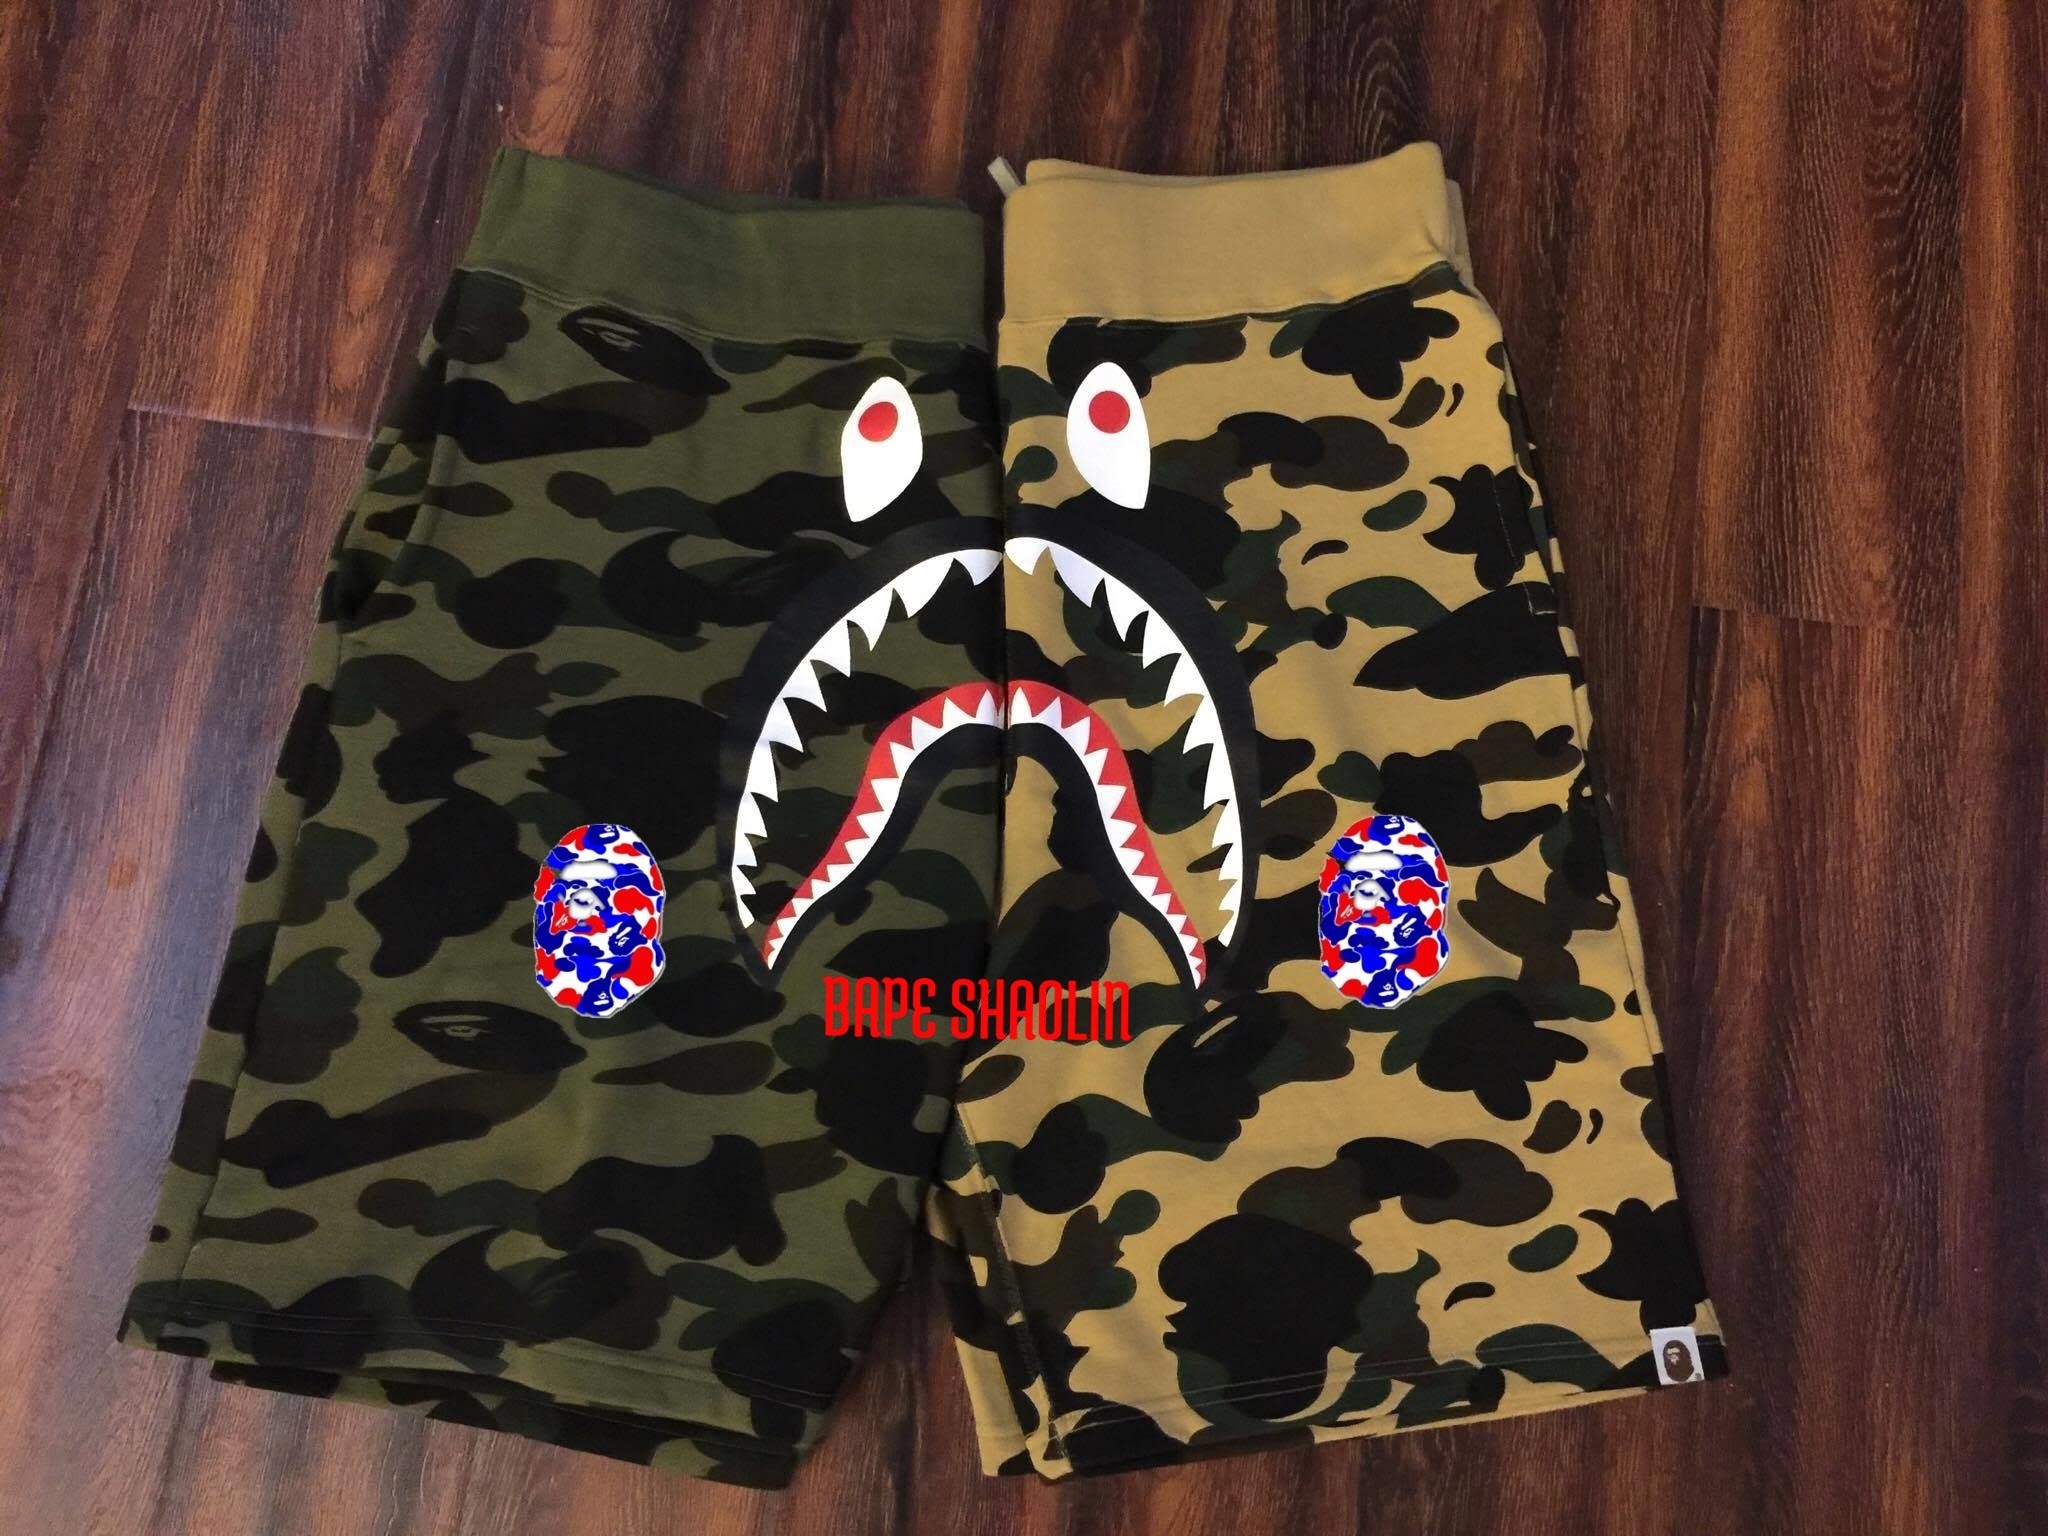 056 Bape Shaolin Bape A Bathing Ape Review Clothing Collection Outfit Pickup Unboxing – YouTube